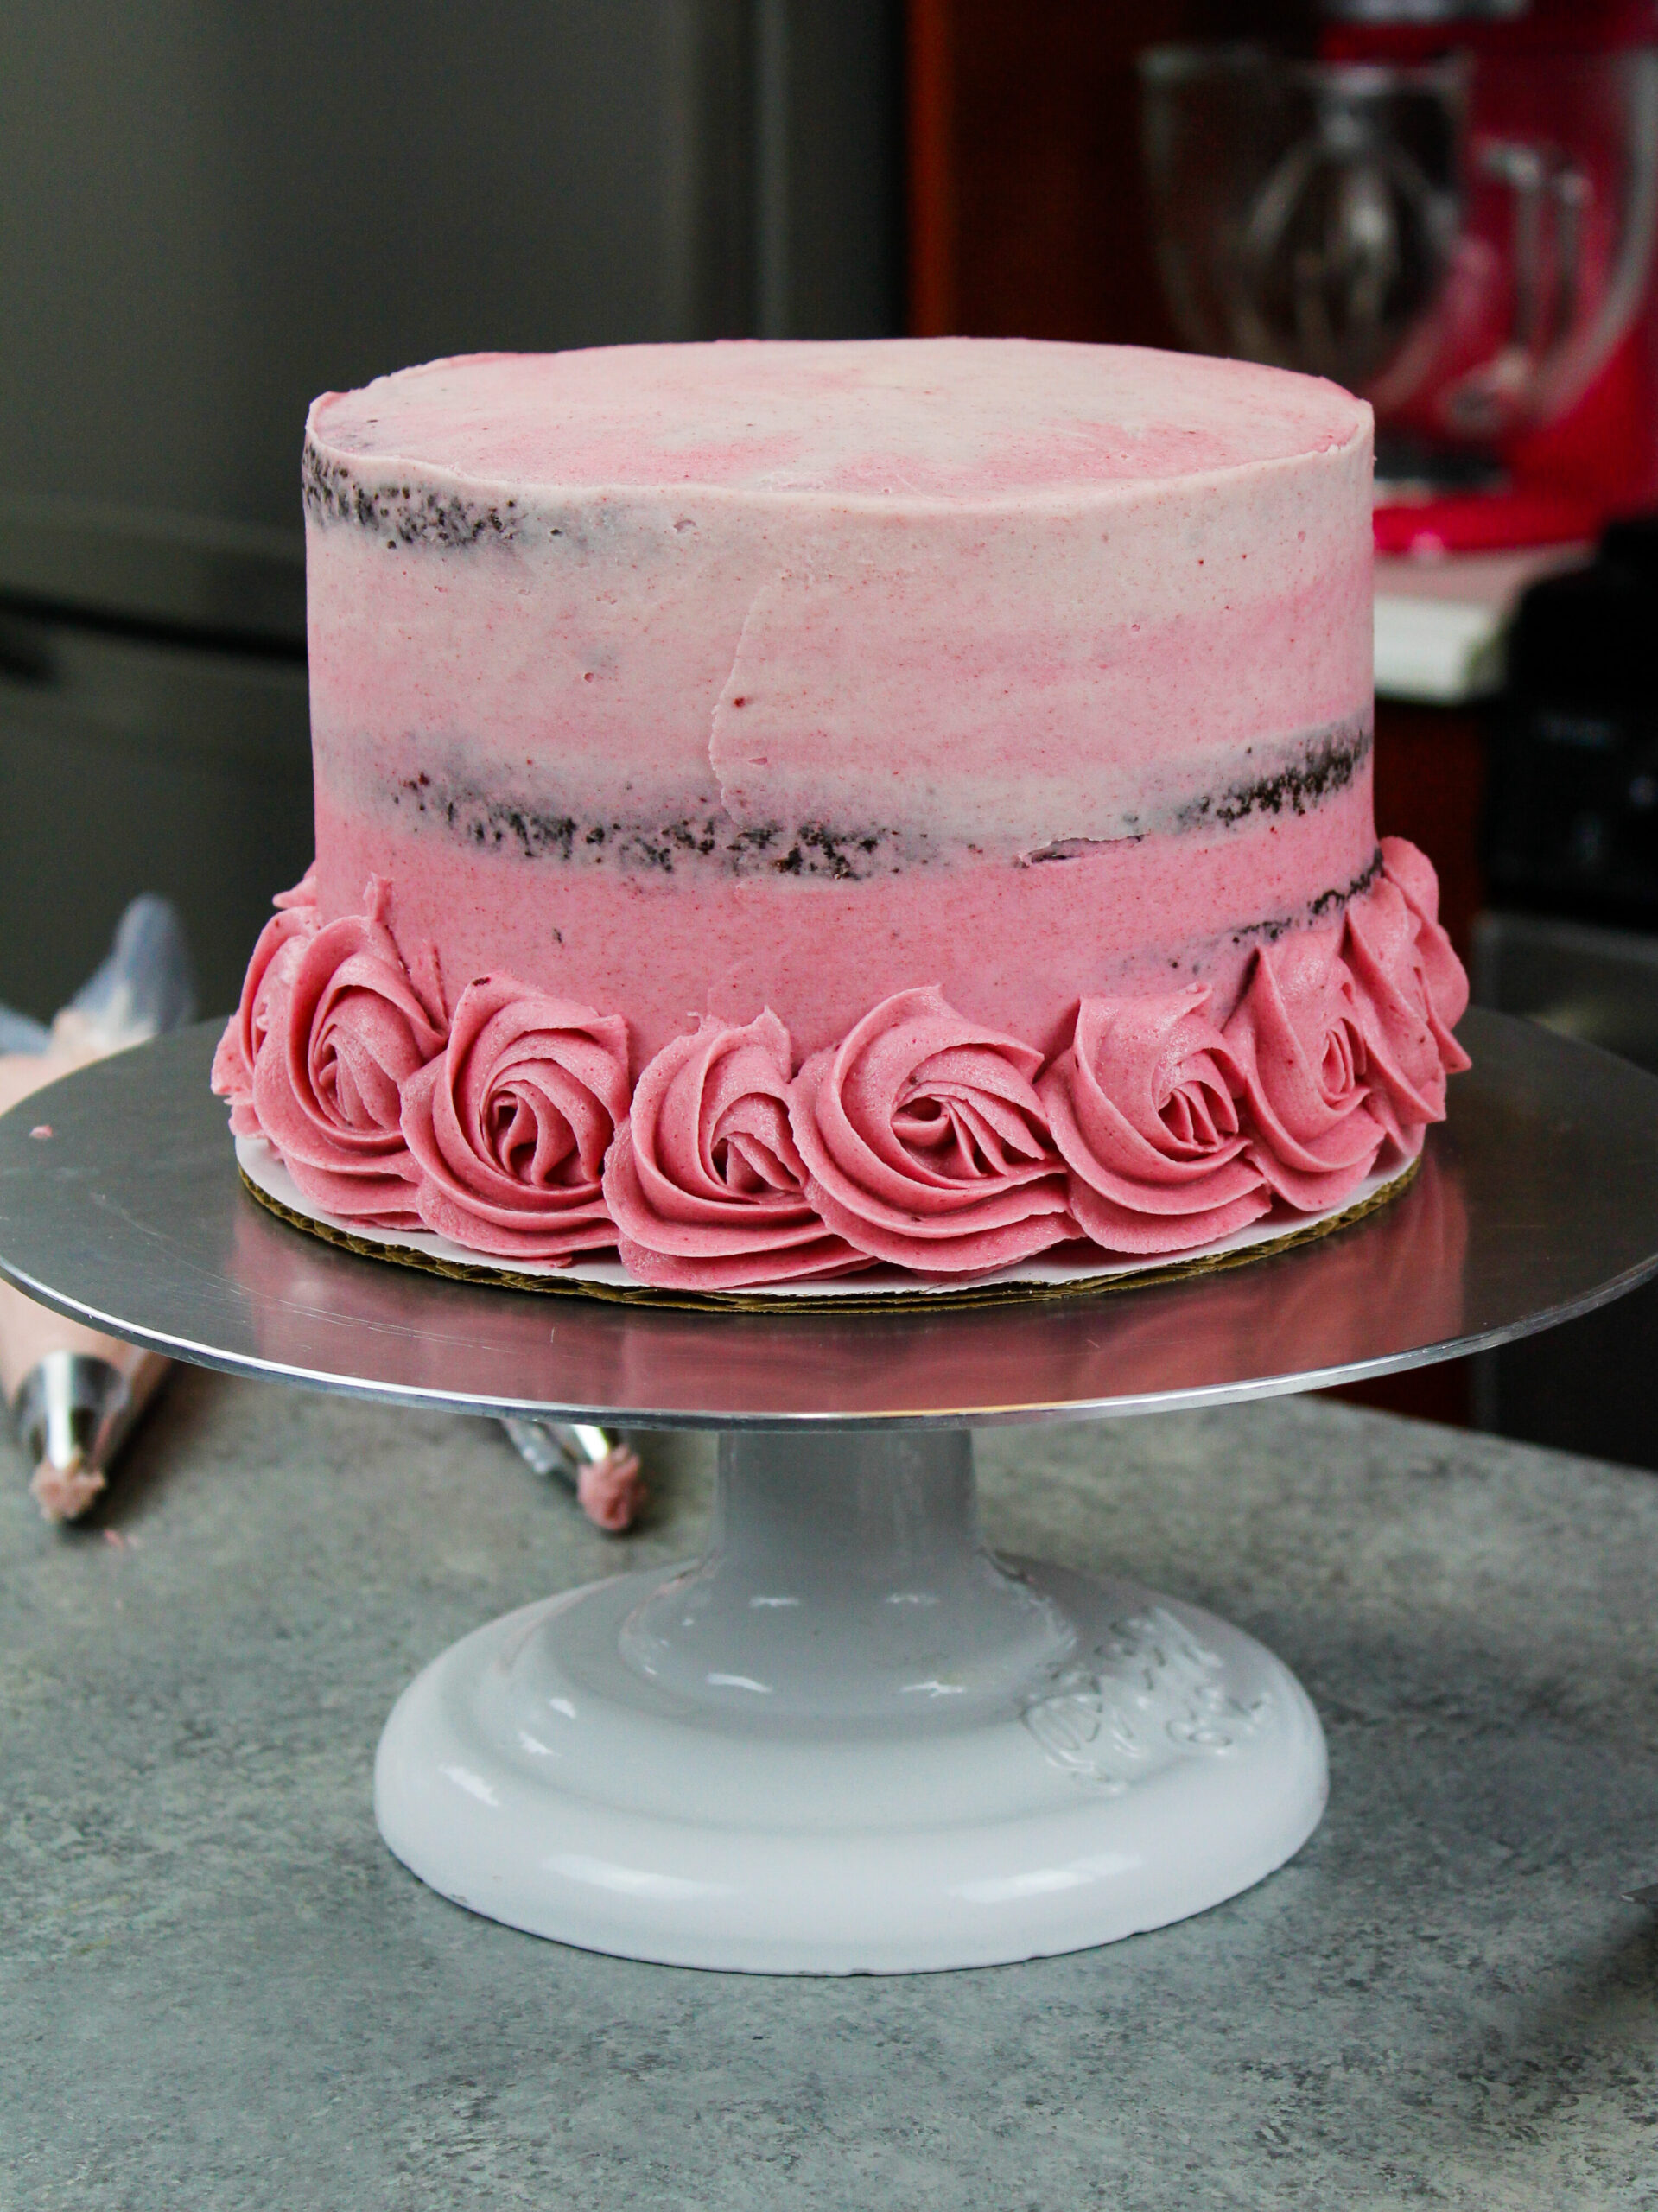 image of a chocolate cake that has been crumb coated with pink frosting to match the ombre buttercream rosettes that will be piped onto it to decorate it